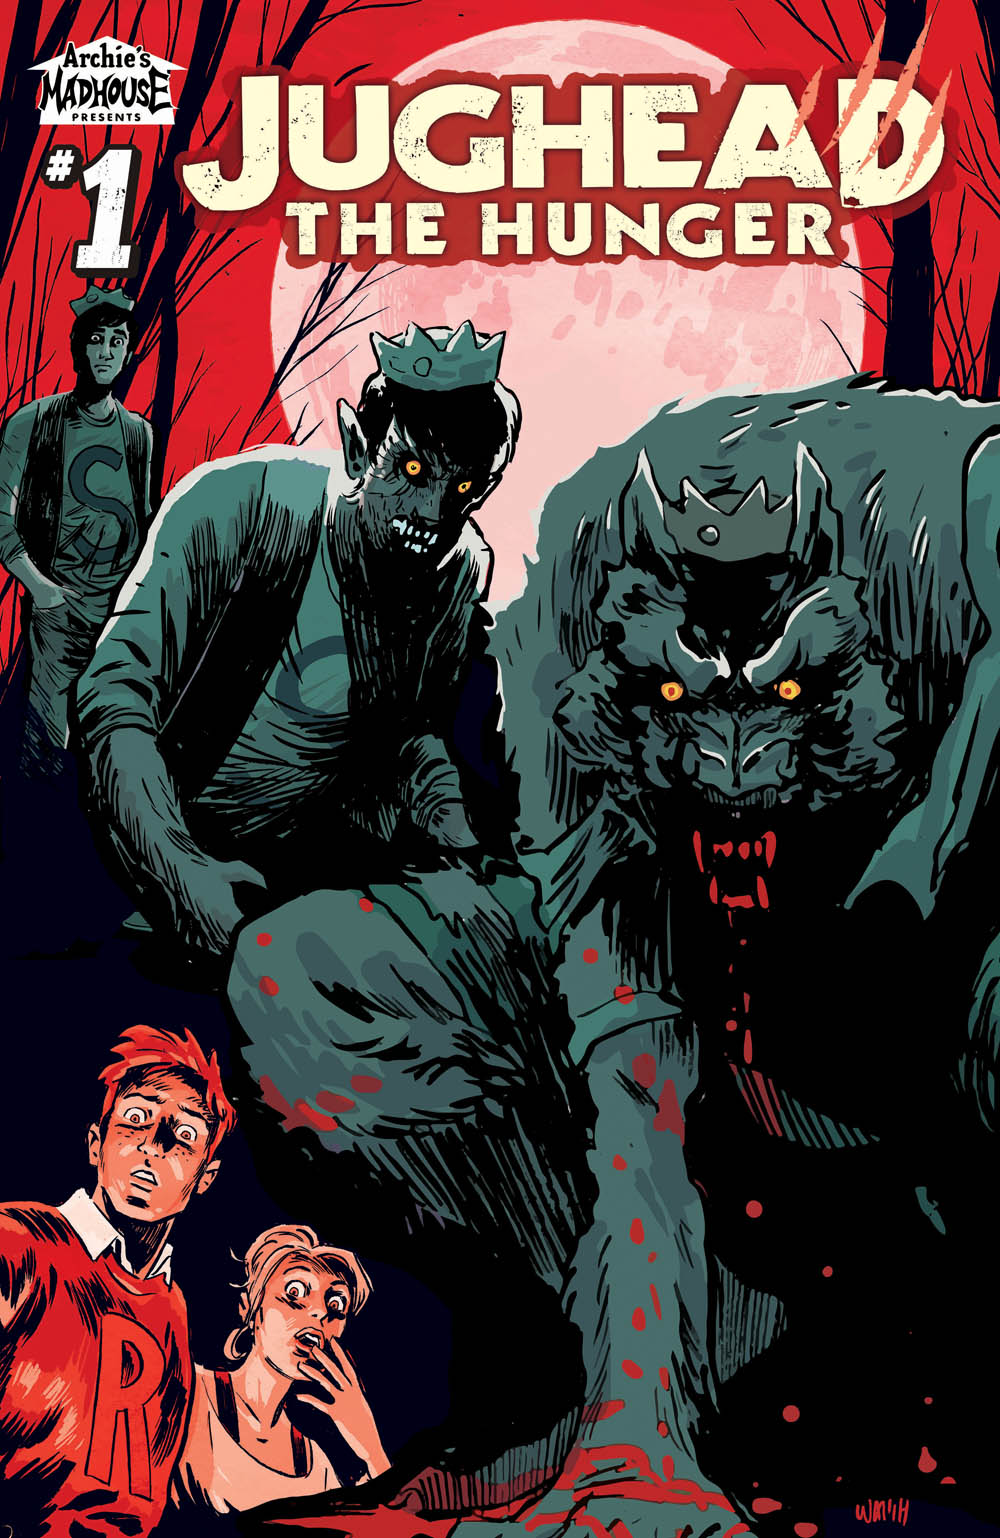 Werewolf Jughead Will Return For His Own Ongoing Comic Series